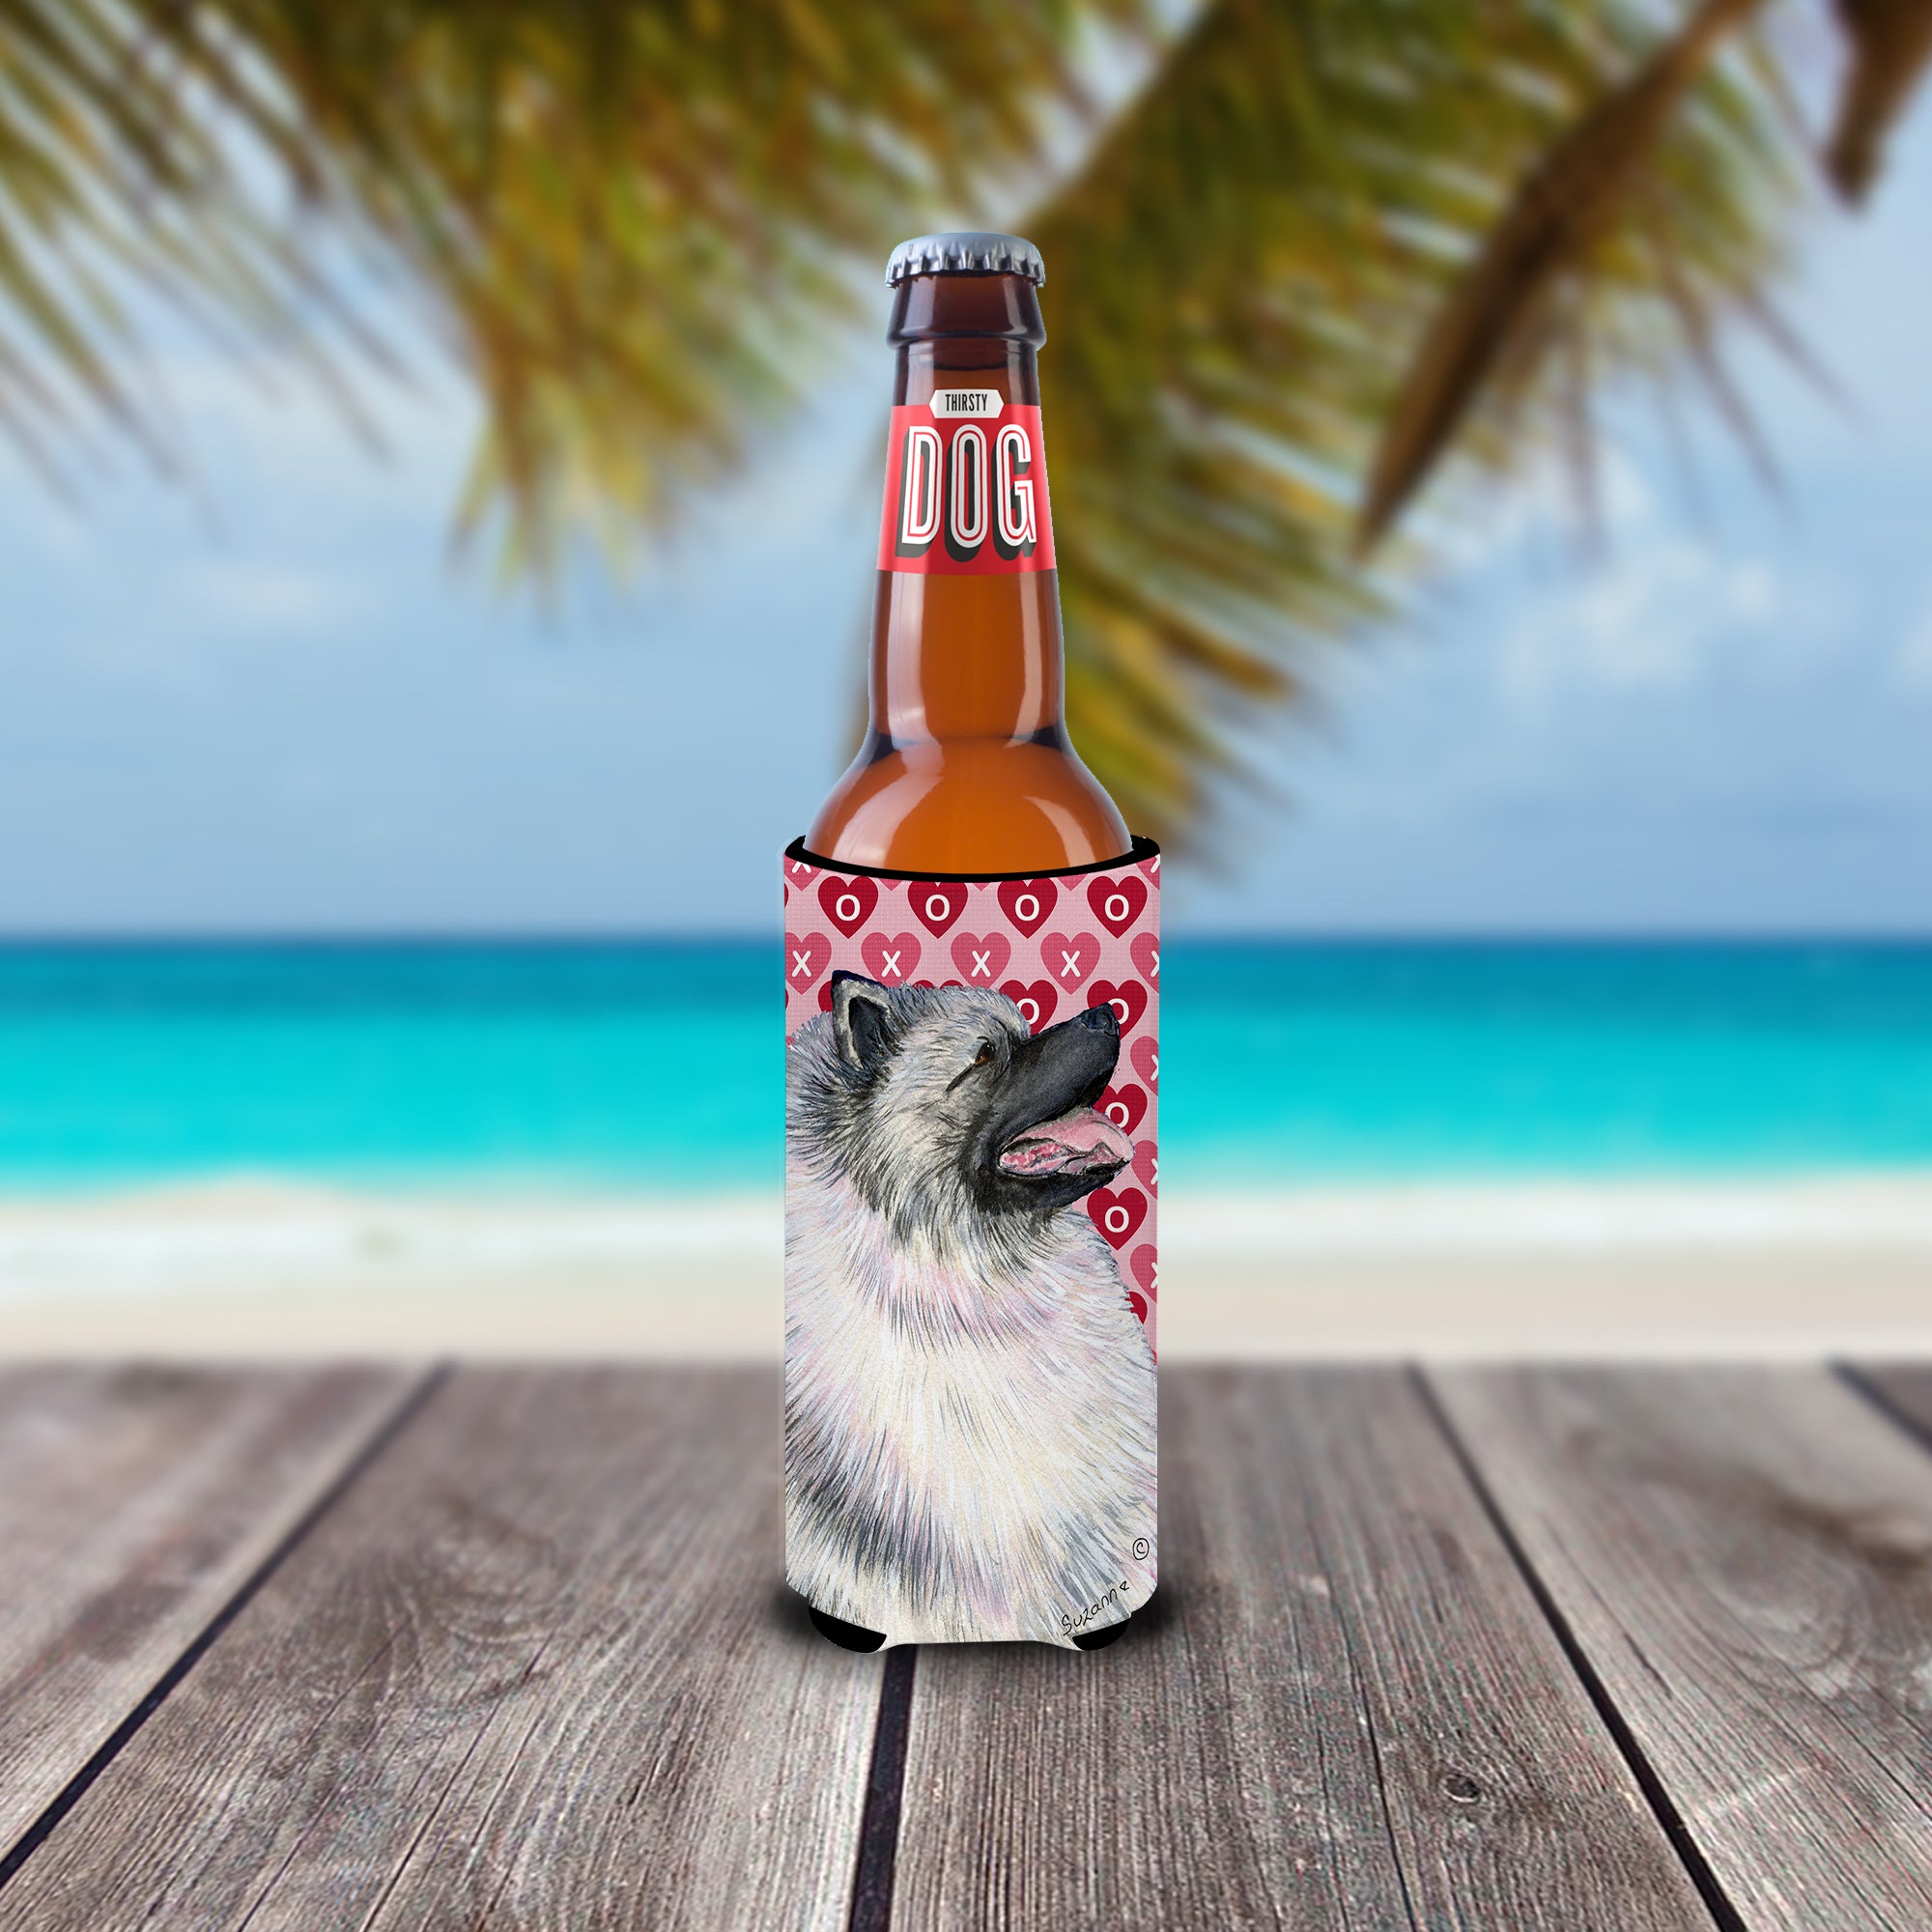 Keeshond Hearts Love and Valentine's Day Portrait Ultra Beverage Insulators for slim cans SS4488MUK